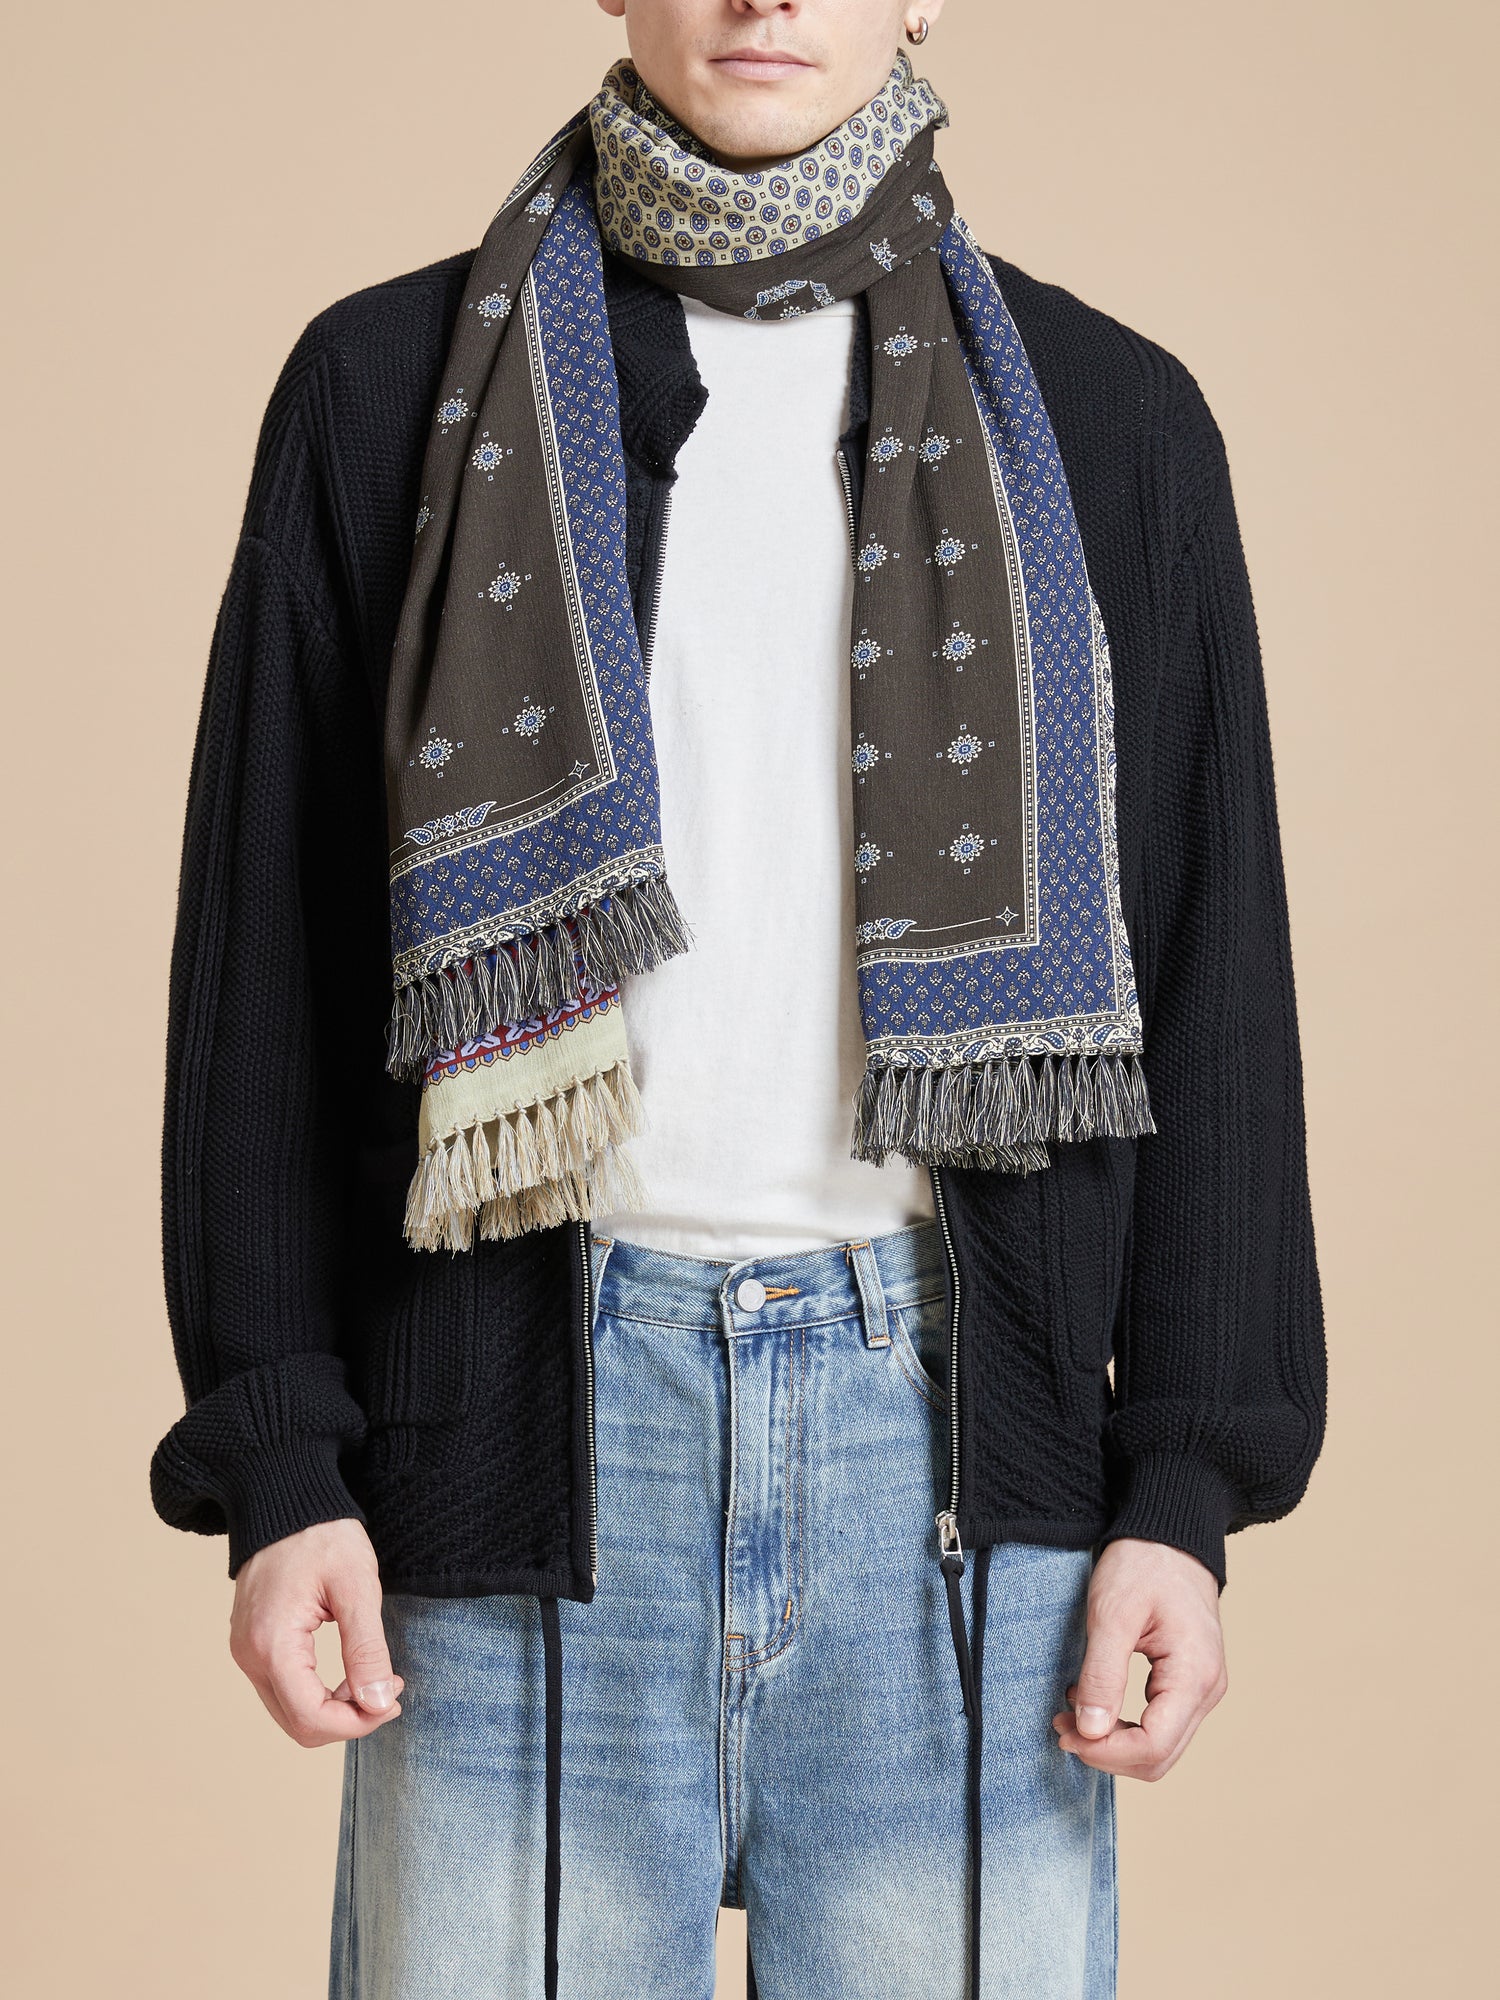 A man wearing jeans and a Black Royal Blue Print Scarf by Found.